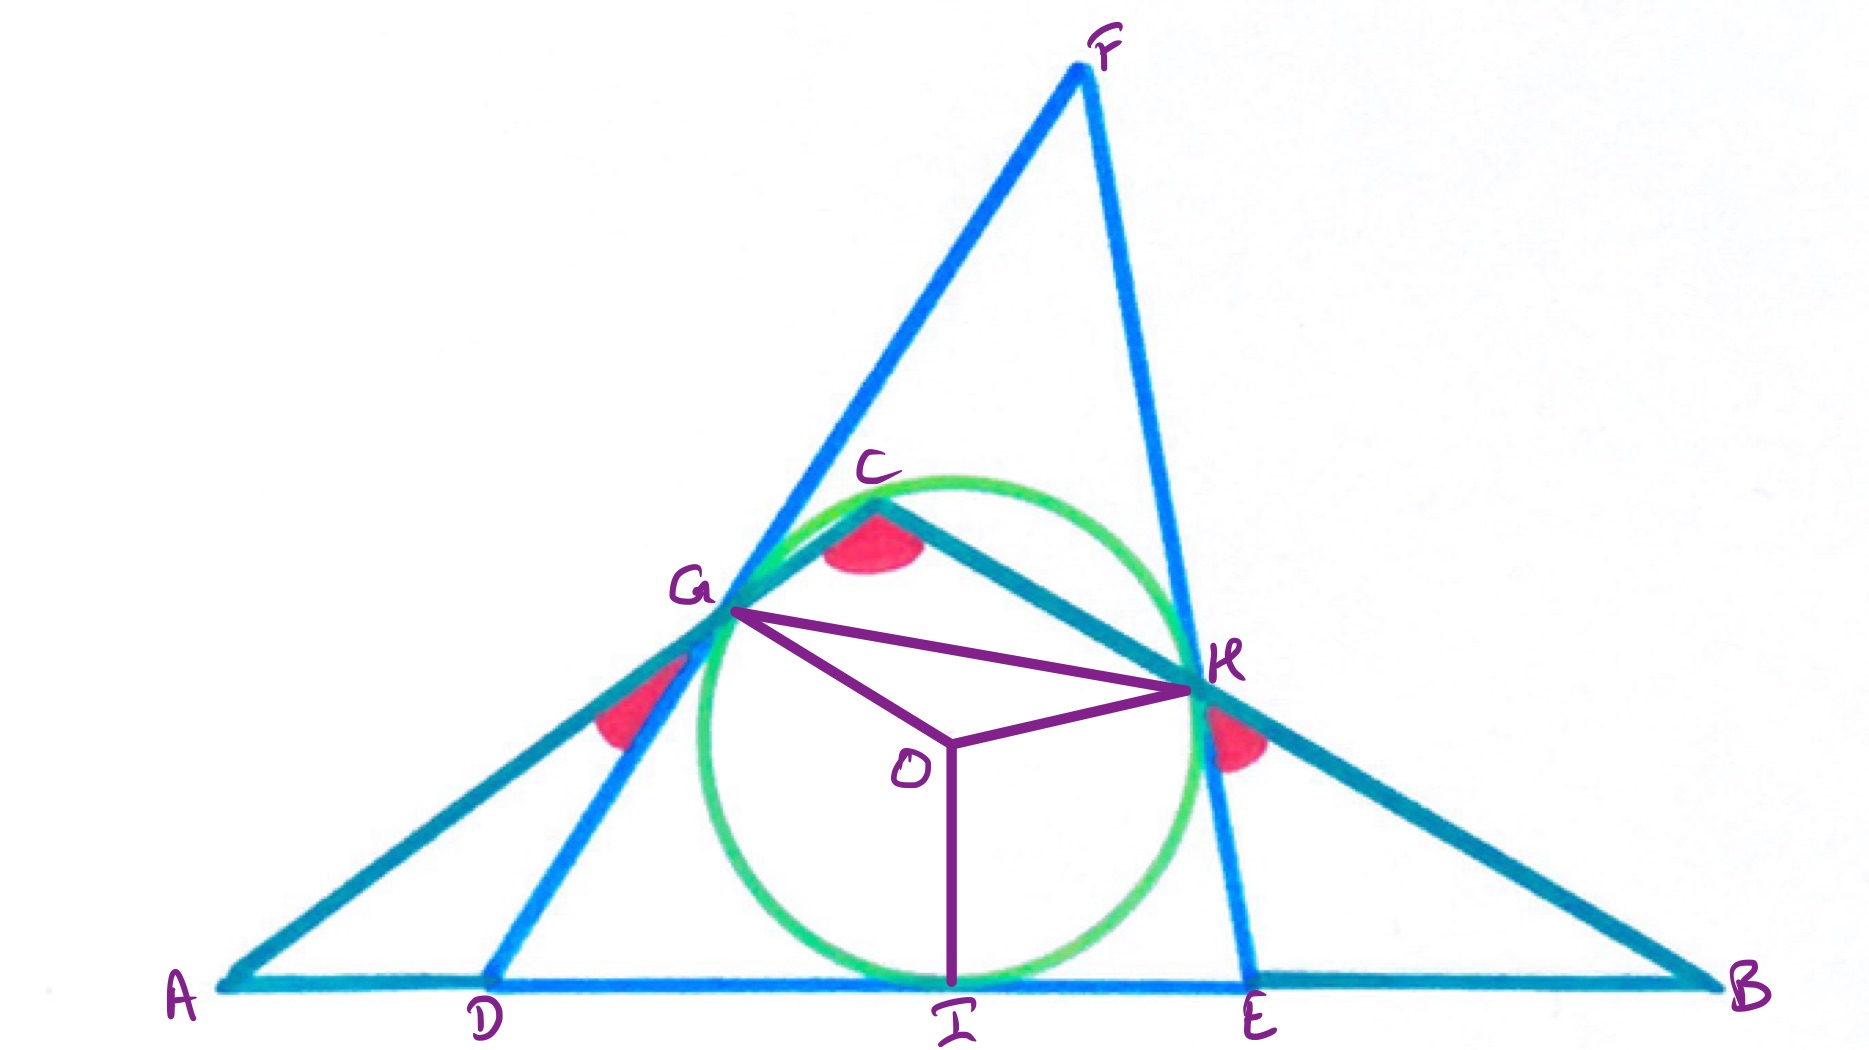 Two overlapping triangles and a circle labelled